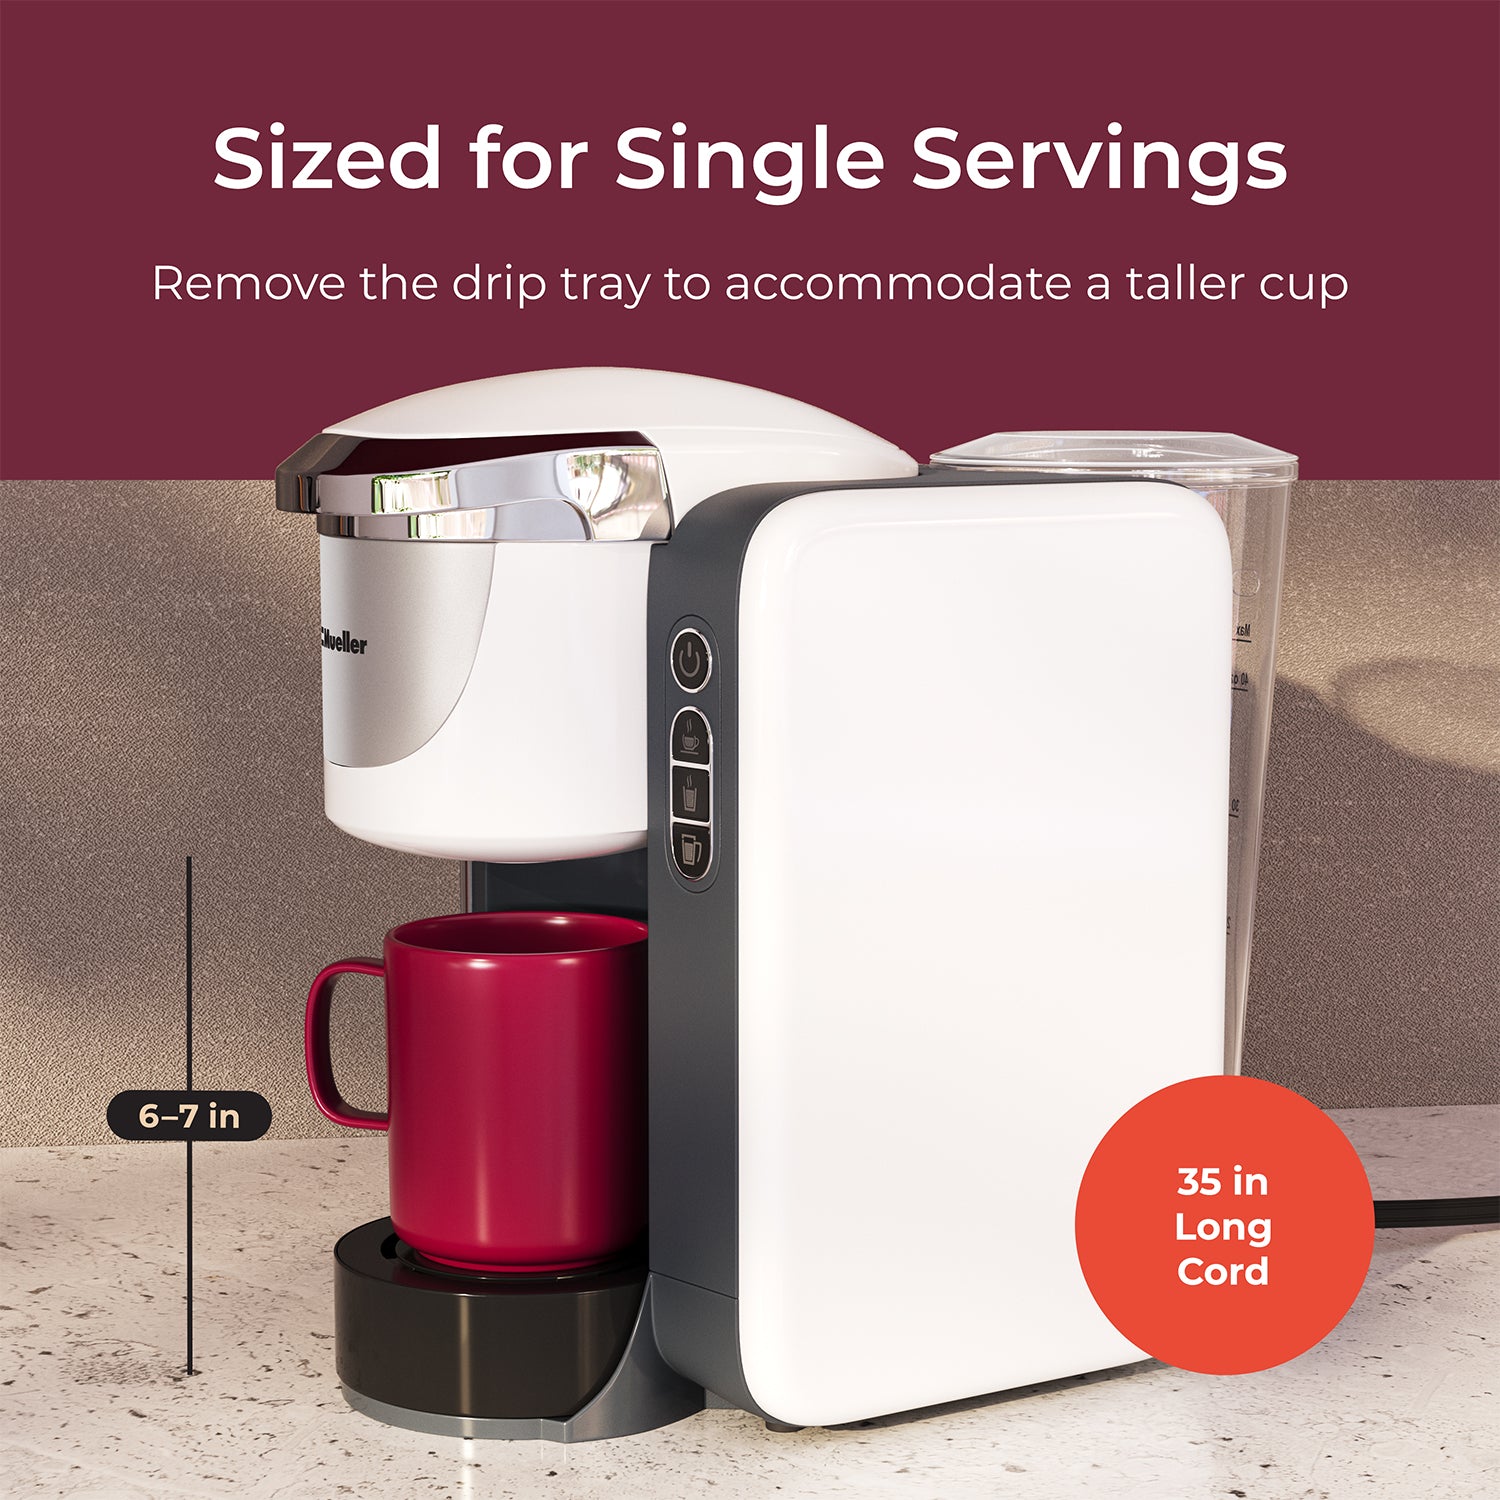 Mixpresso Single Serve 2 in 1 Coffee Brewer K-Cup Pods Compatible & Ground  Coffee,Compact Coffee Maker Single Serve With 30 oz Detachable Reservoir, 5